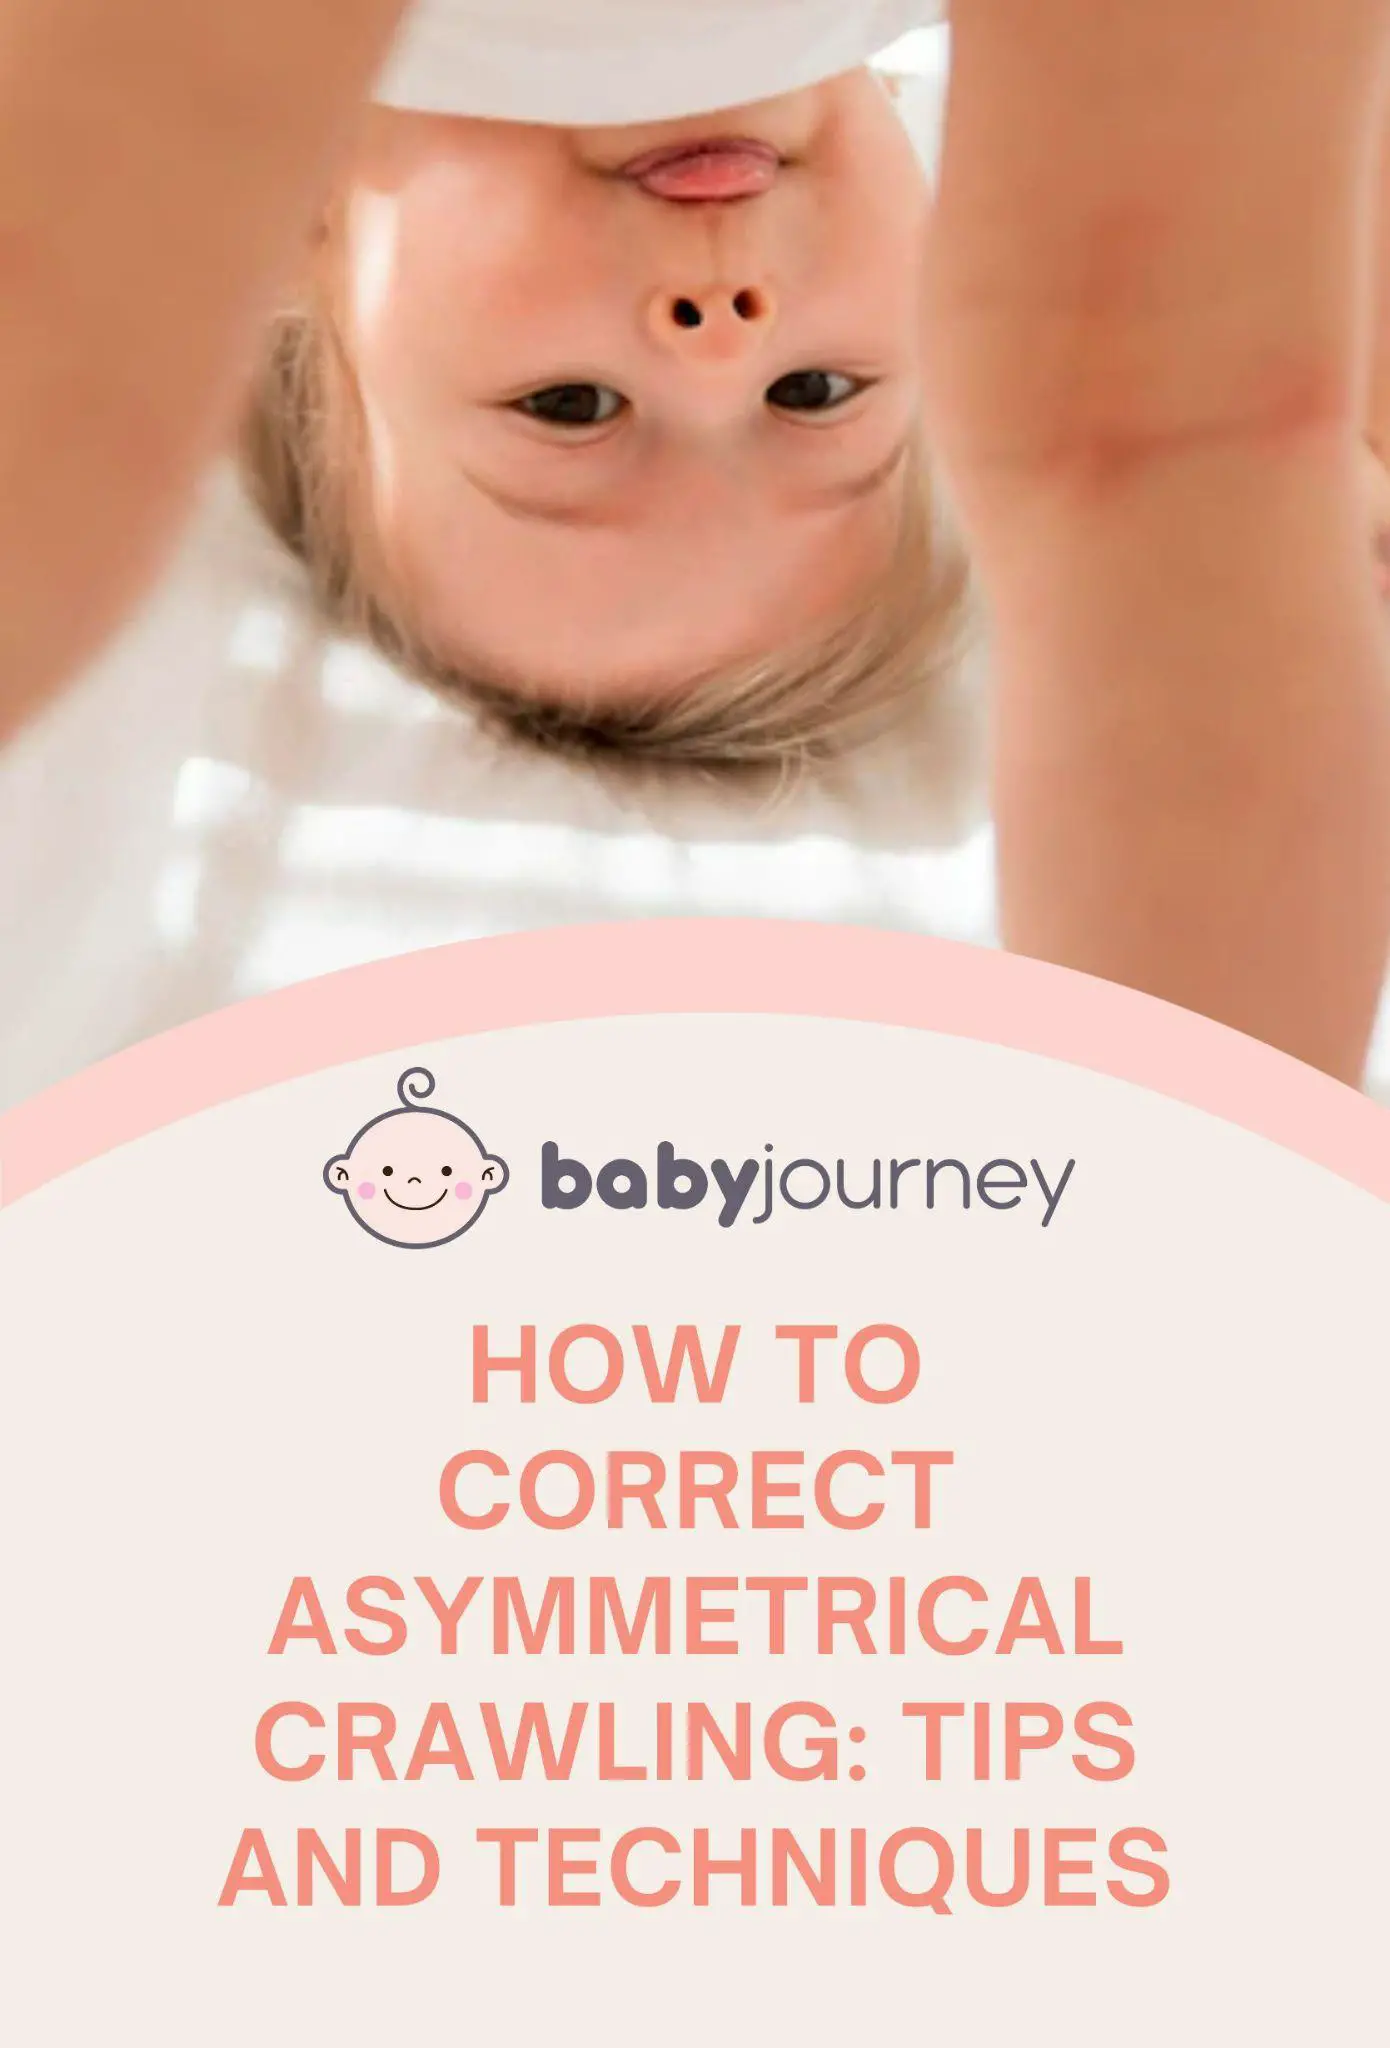 How to Correct Asymmetrical Crawling: Tips and Techniques Pinterest Image - Baby Journey 